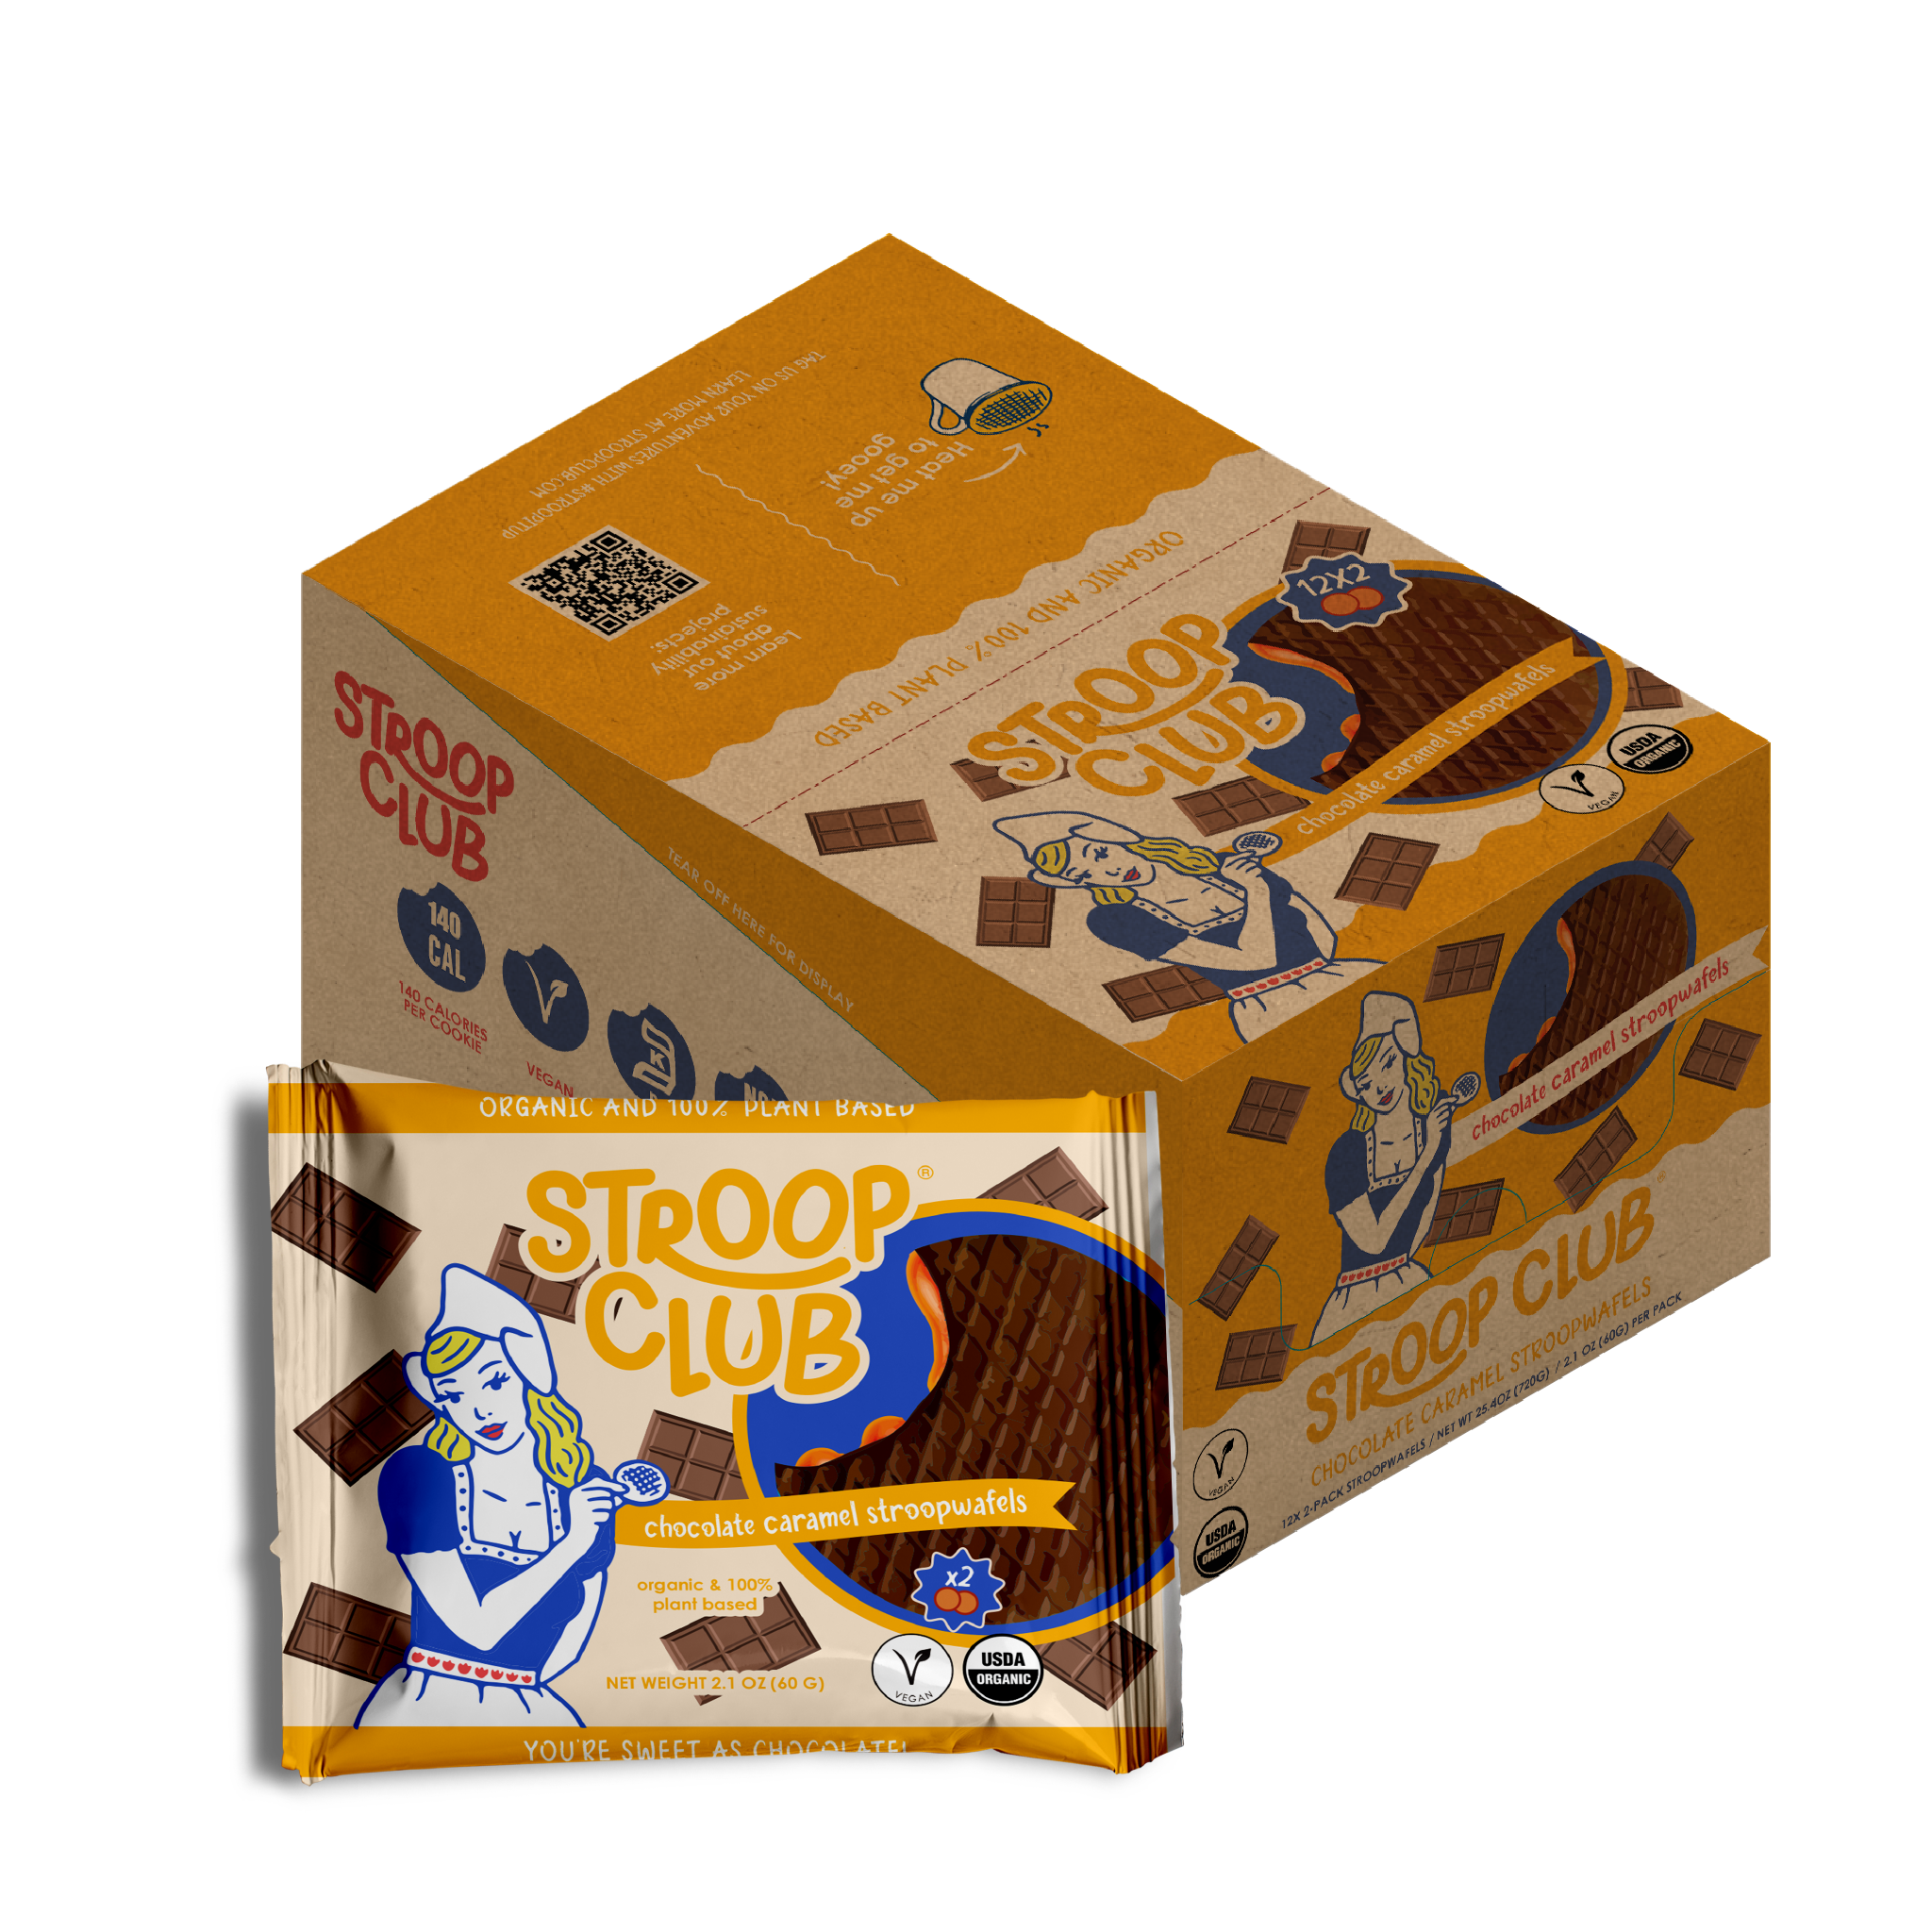 Chocolate Caramel Plant Based and Organic Stroopwafels (box of 12x 2-pack - 24 total)